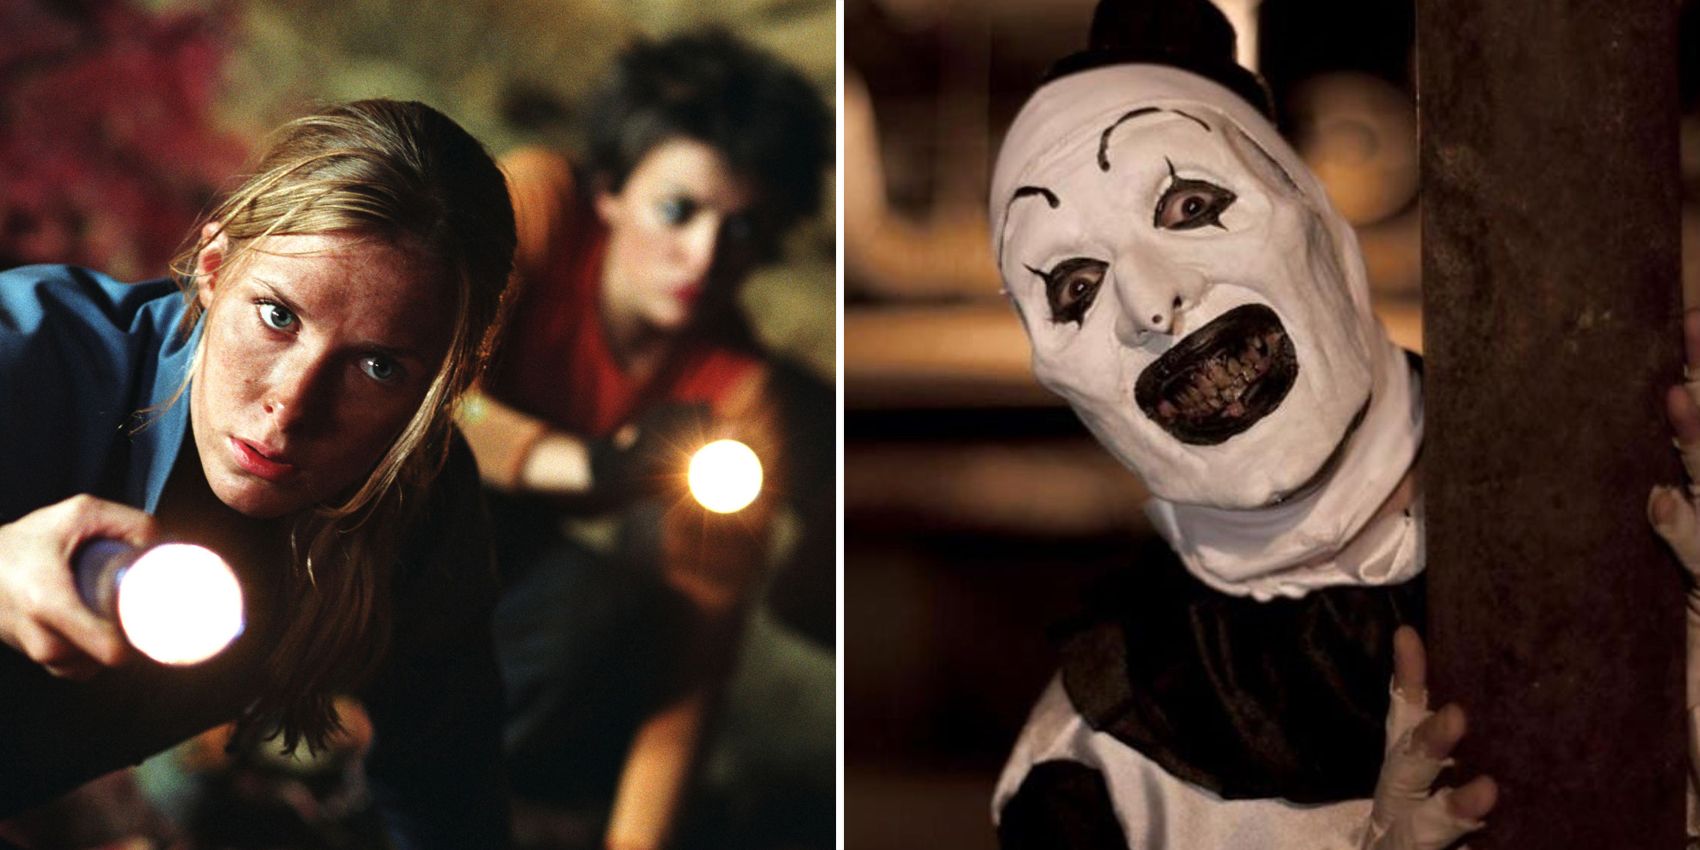 10 Creepy Movies Fans Refuse To Watch Twice